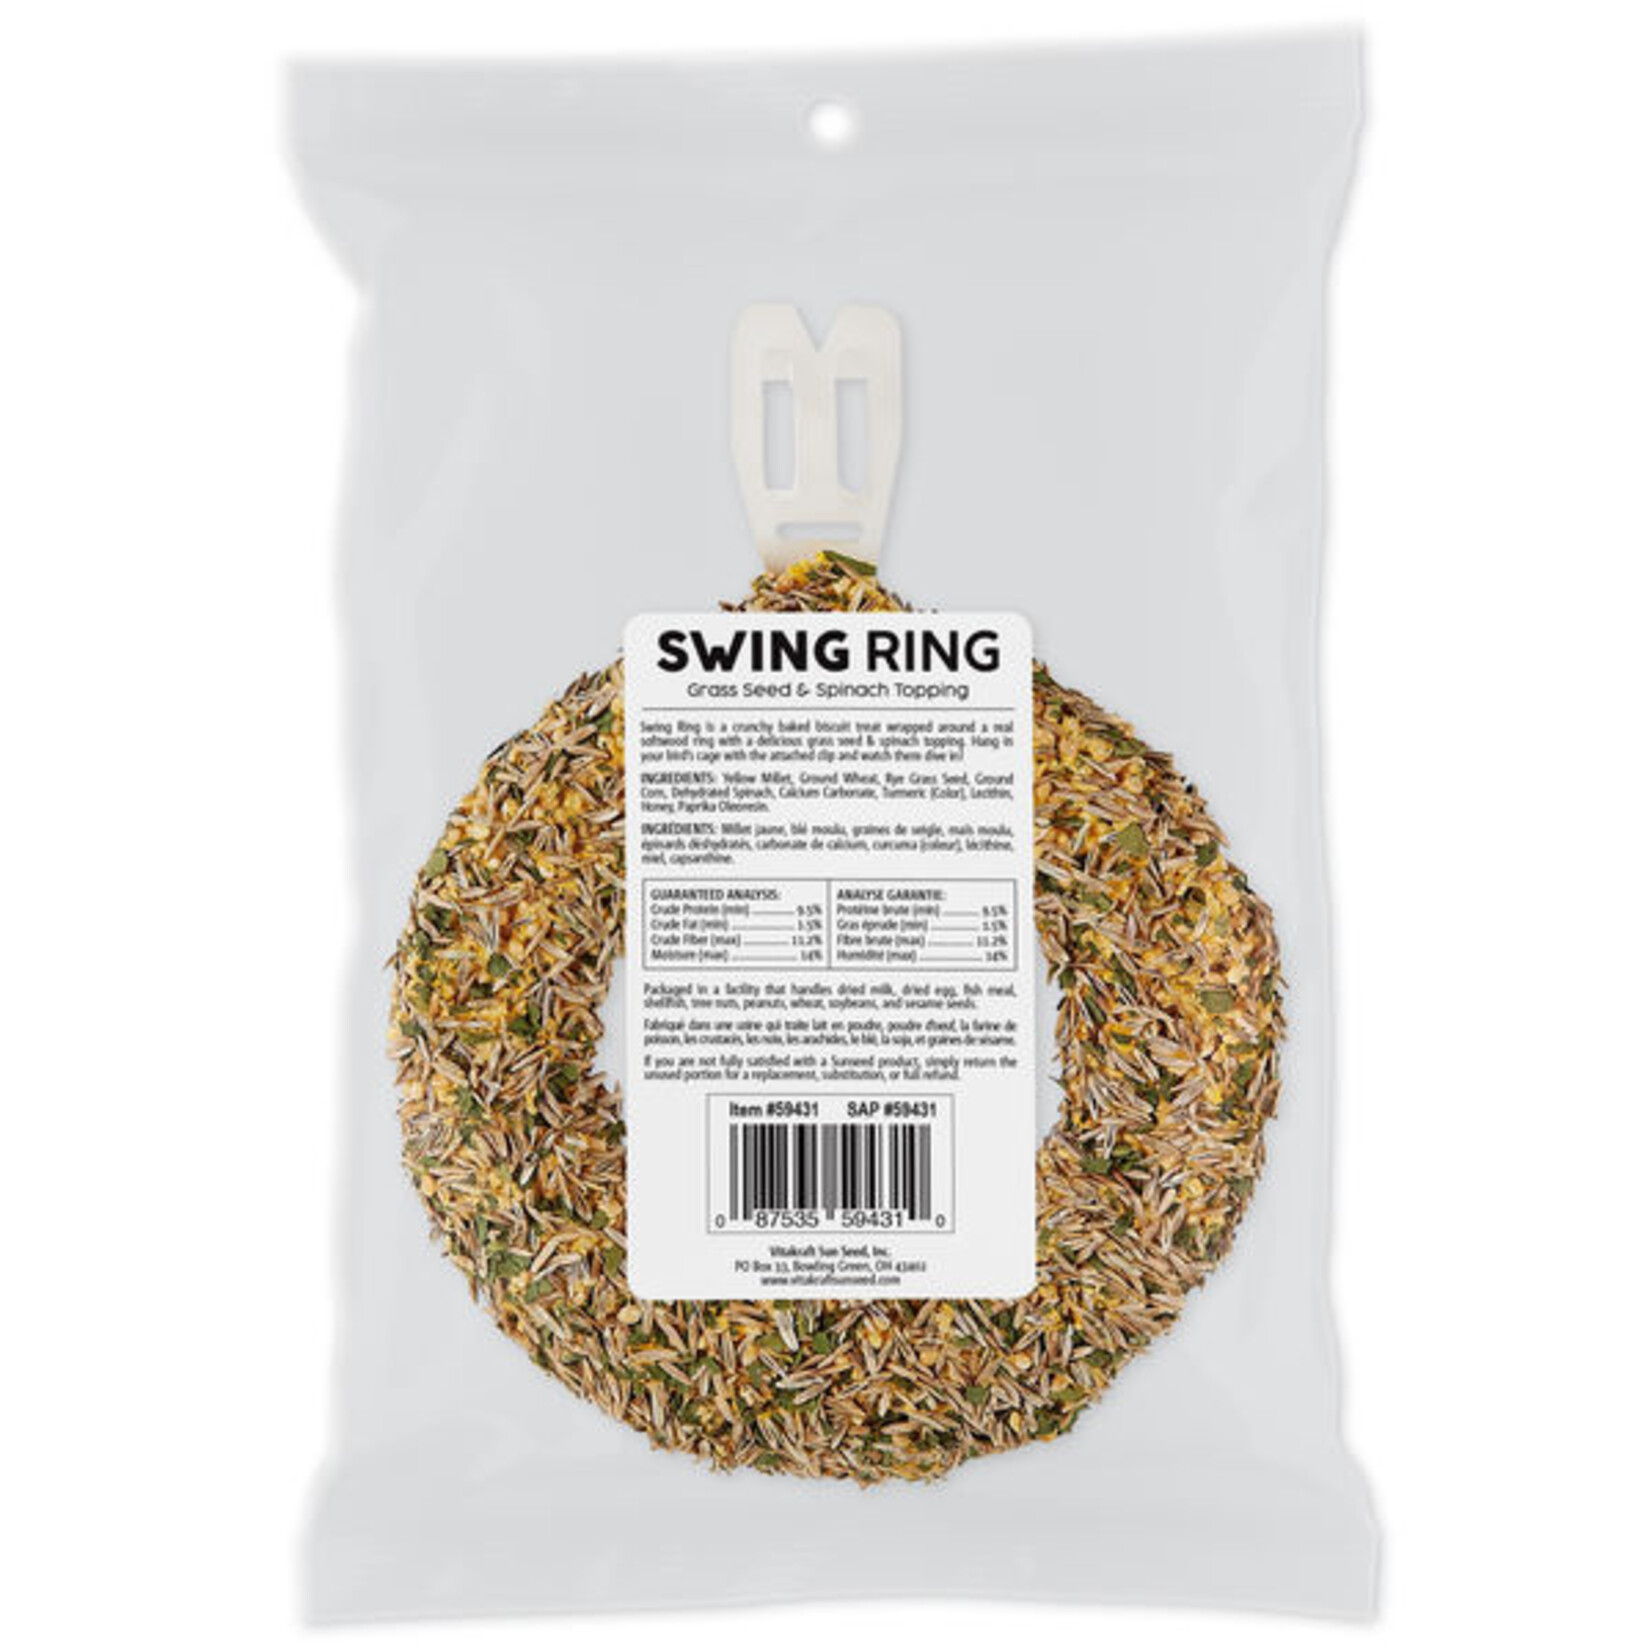 Sunseed Vita Prima Swing Ring Grass Seed & Spinach